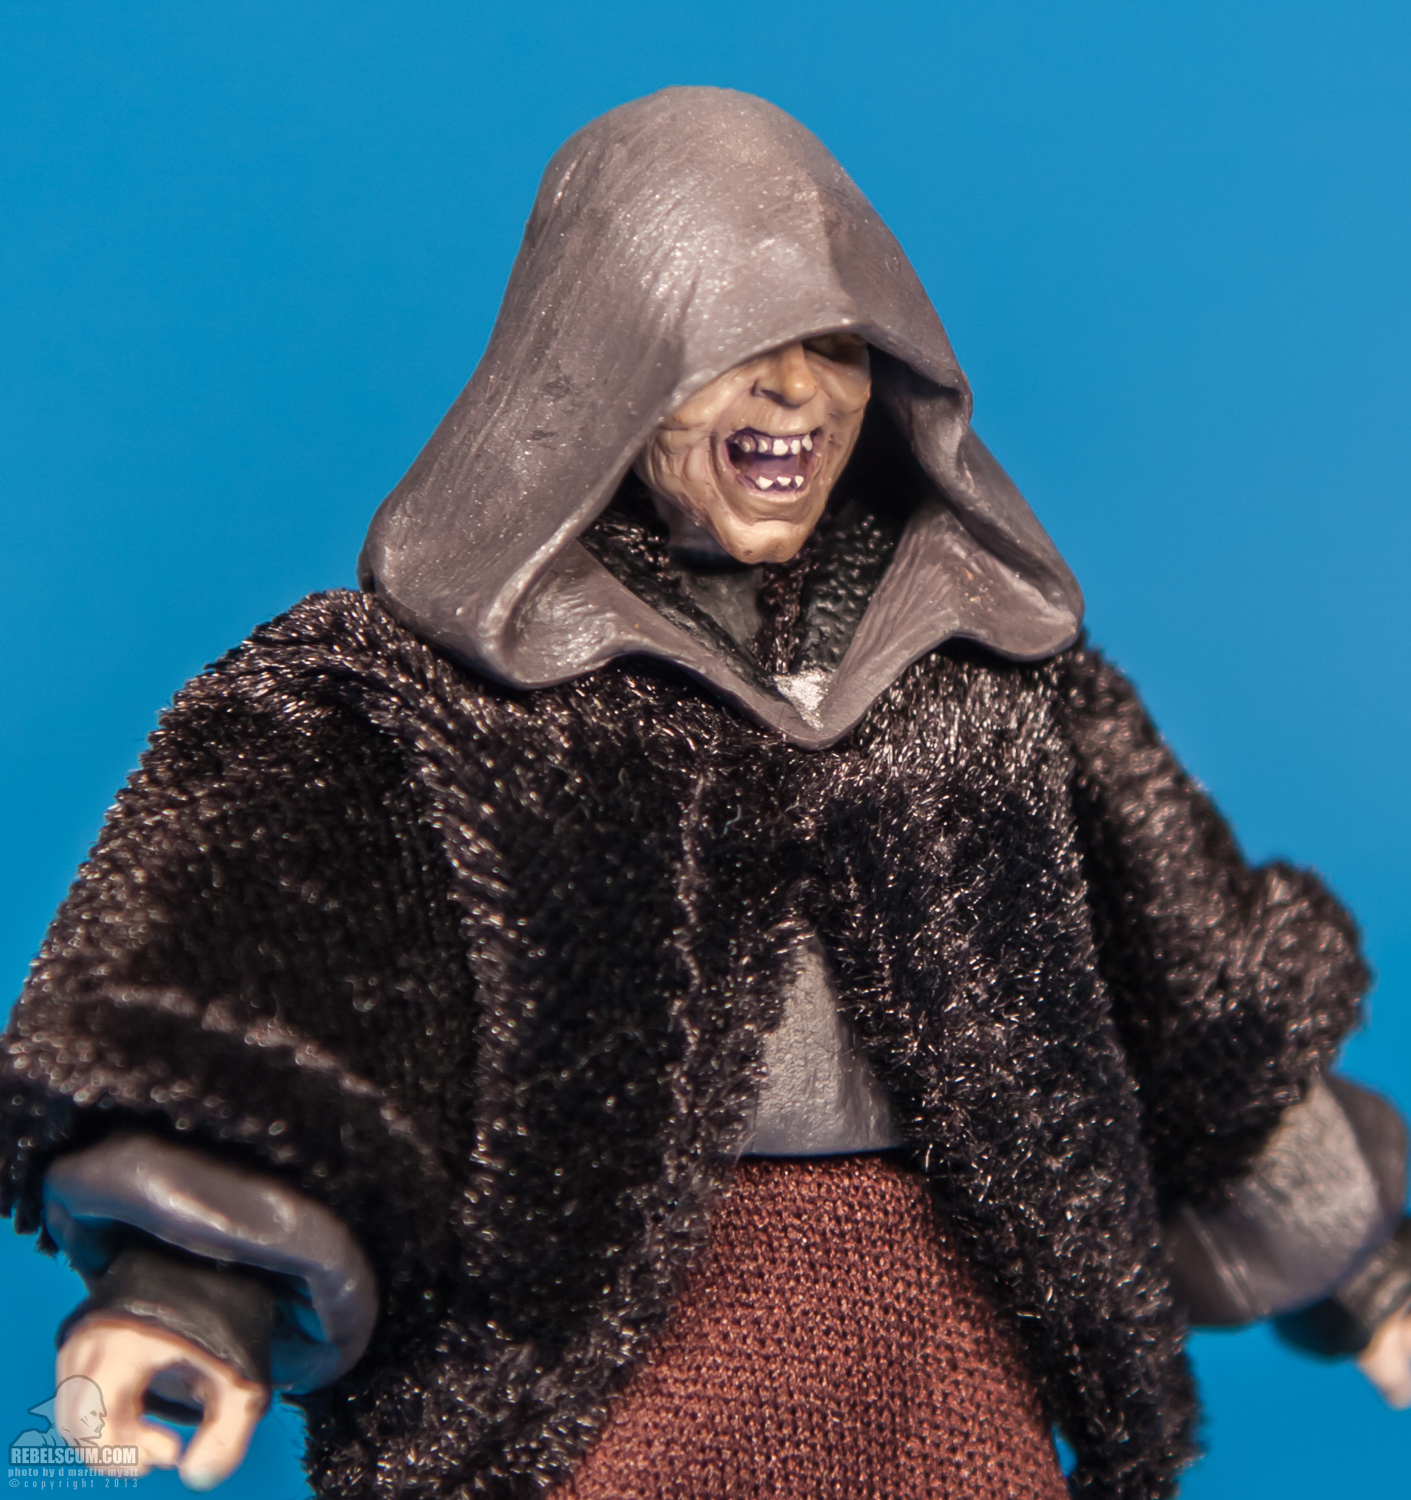 Darth_Sidious_Vintage_Collection_TVC_VC12-06.jpg